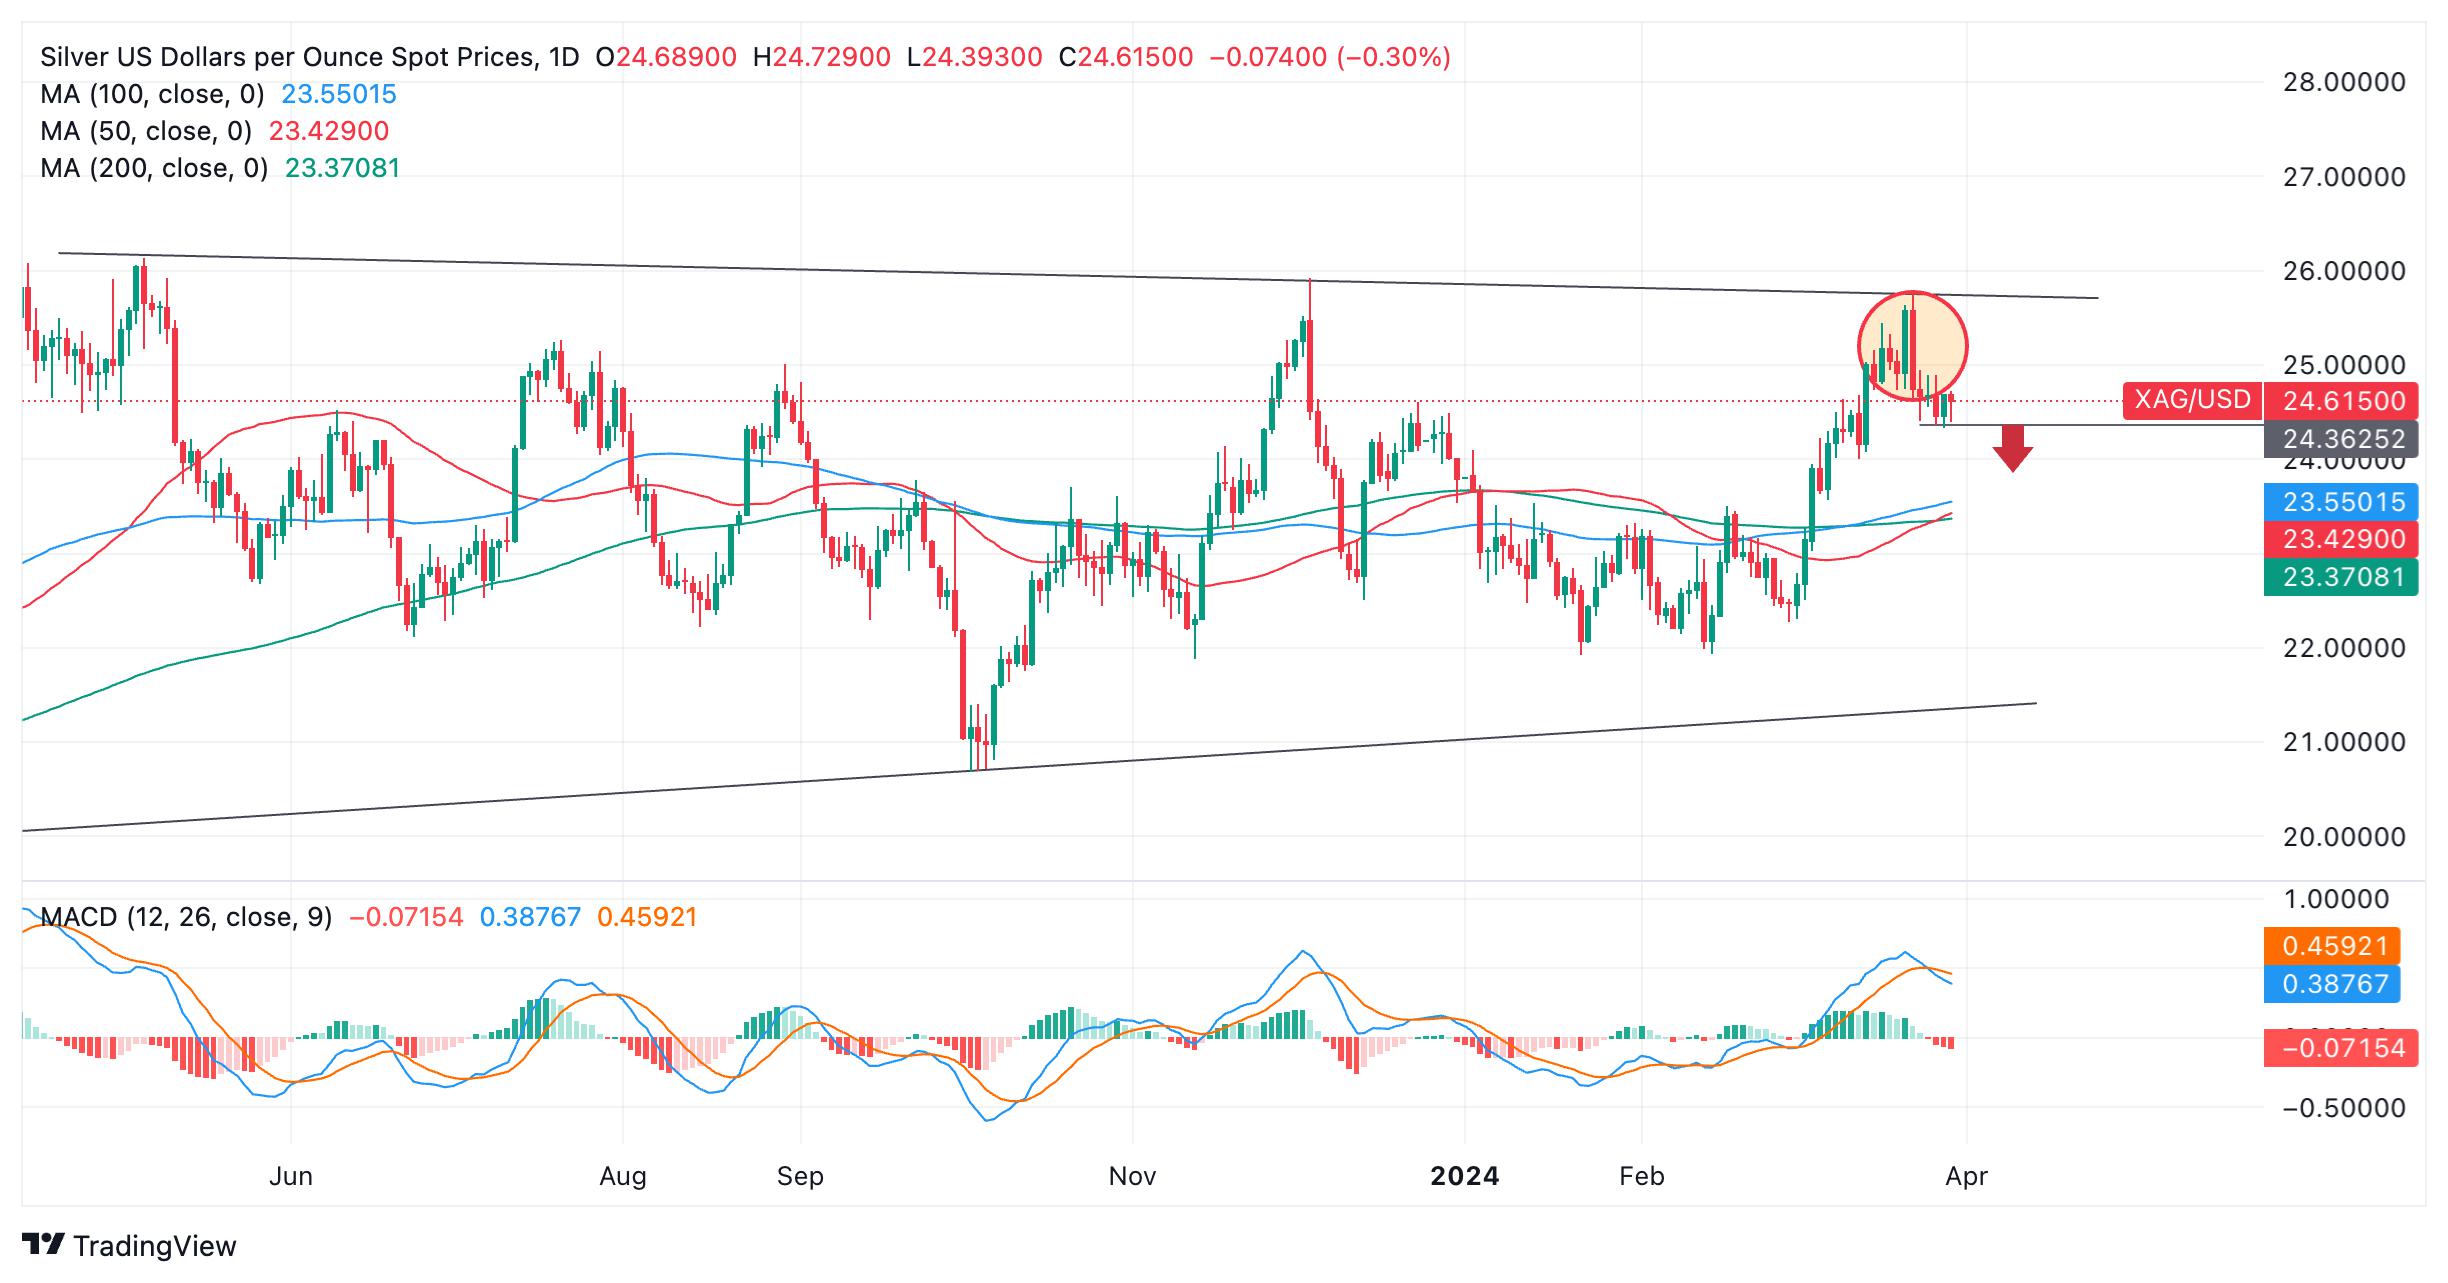 Silver Price Analysis: Continues lower after Bearish Engulfing